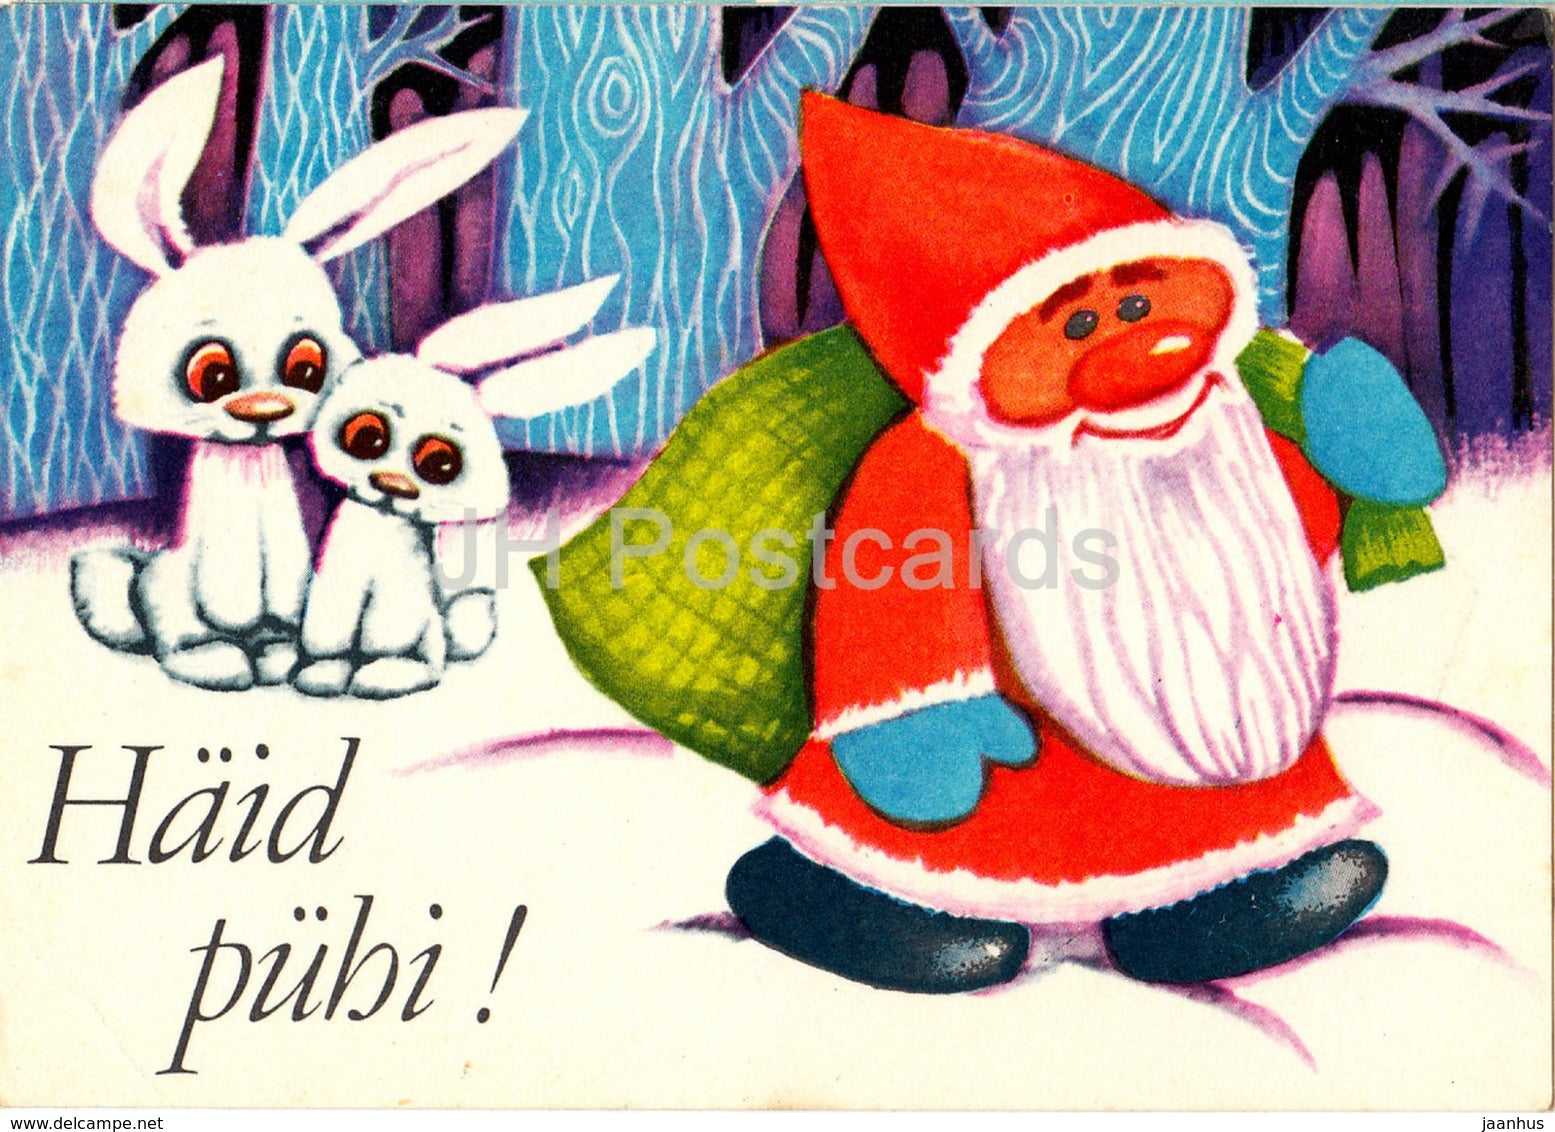 New Year Greeting Card by S. Valjal - Santa Claus - hare - rabbit - 1974 - Estonia USSR - used - JH Postcards